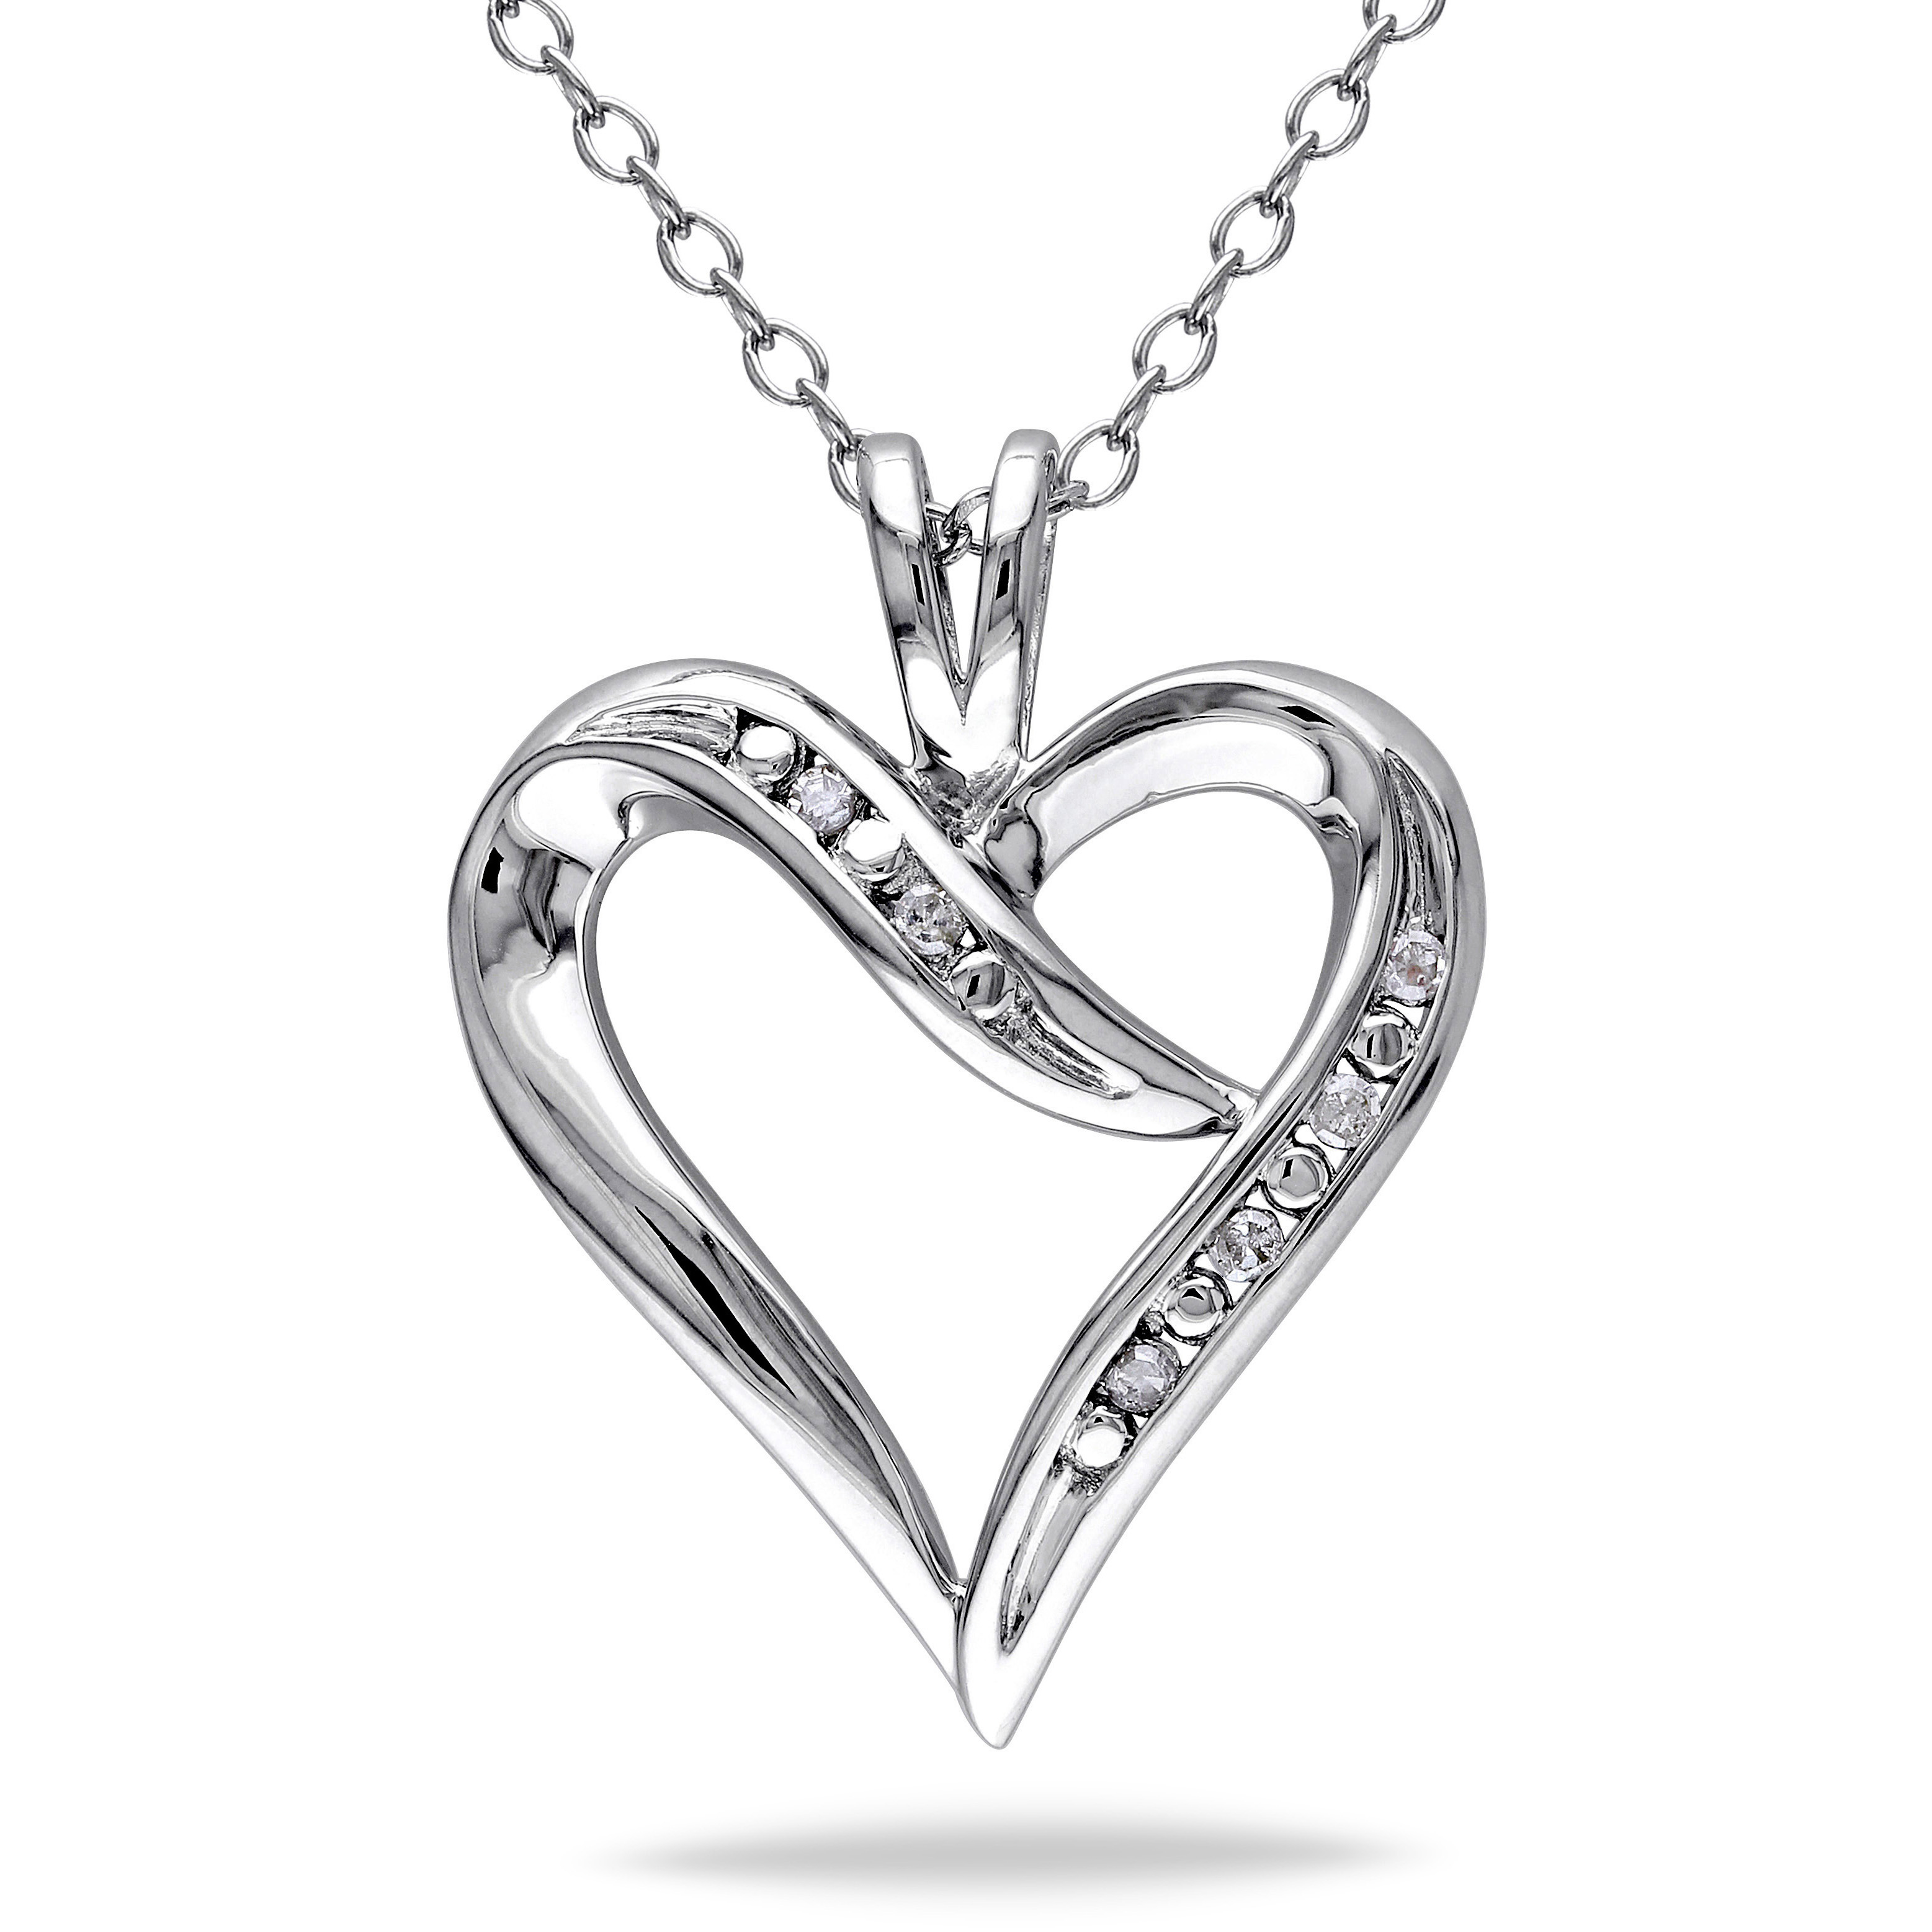 Diamond Heart Pendant with Chain in Sterling Silver